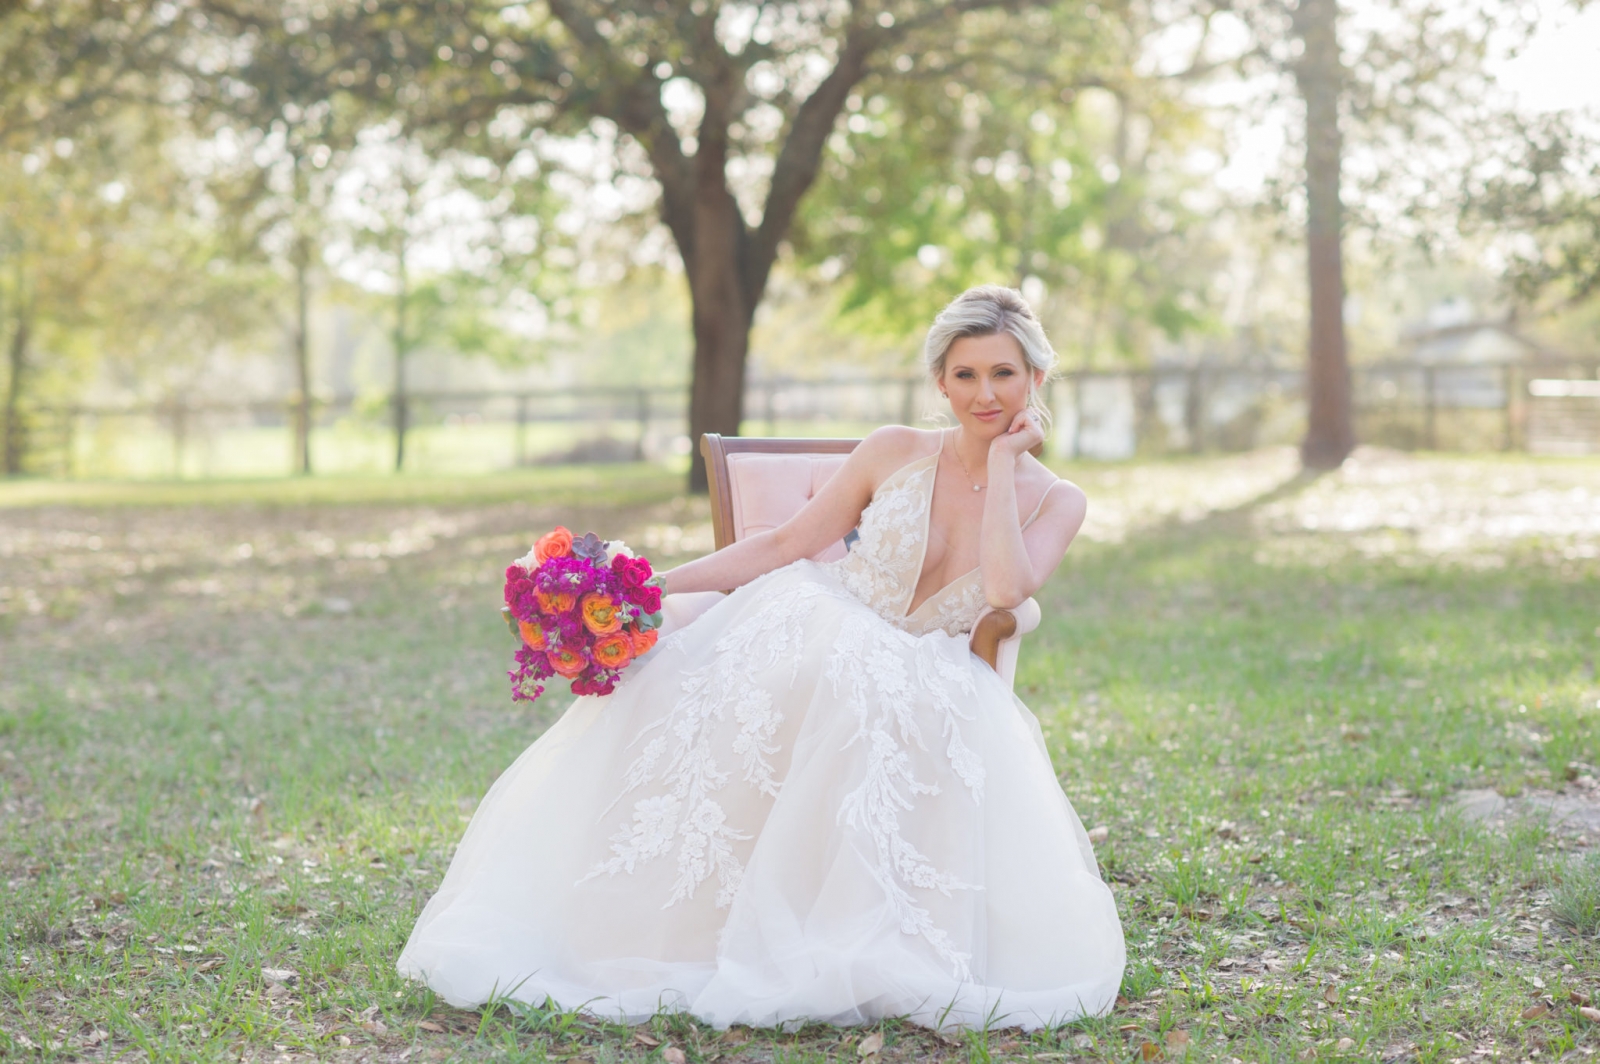 Beautiful Bride sitting in pink chair holding her flowers.